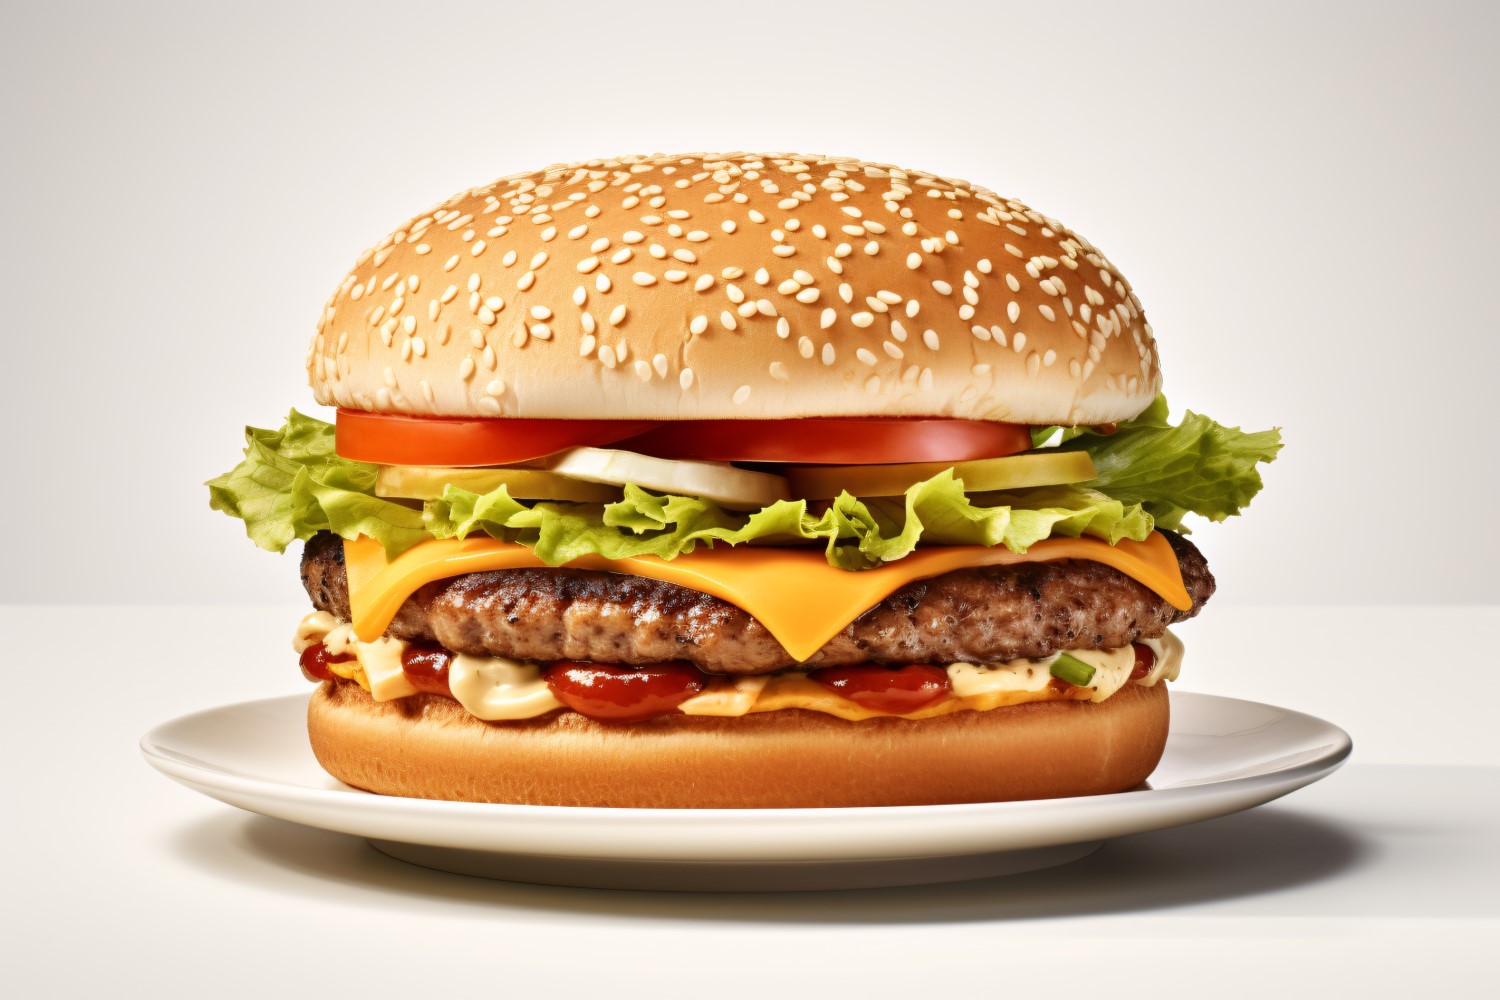 Bacon burger with beef patty, on white background 62